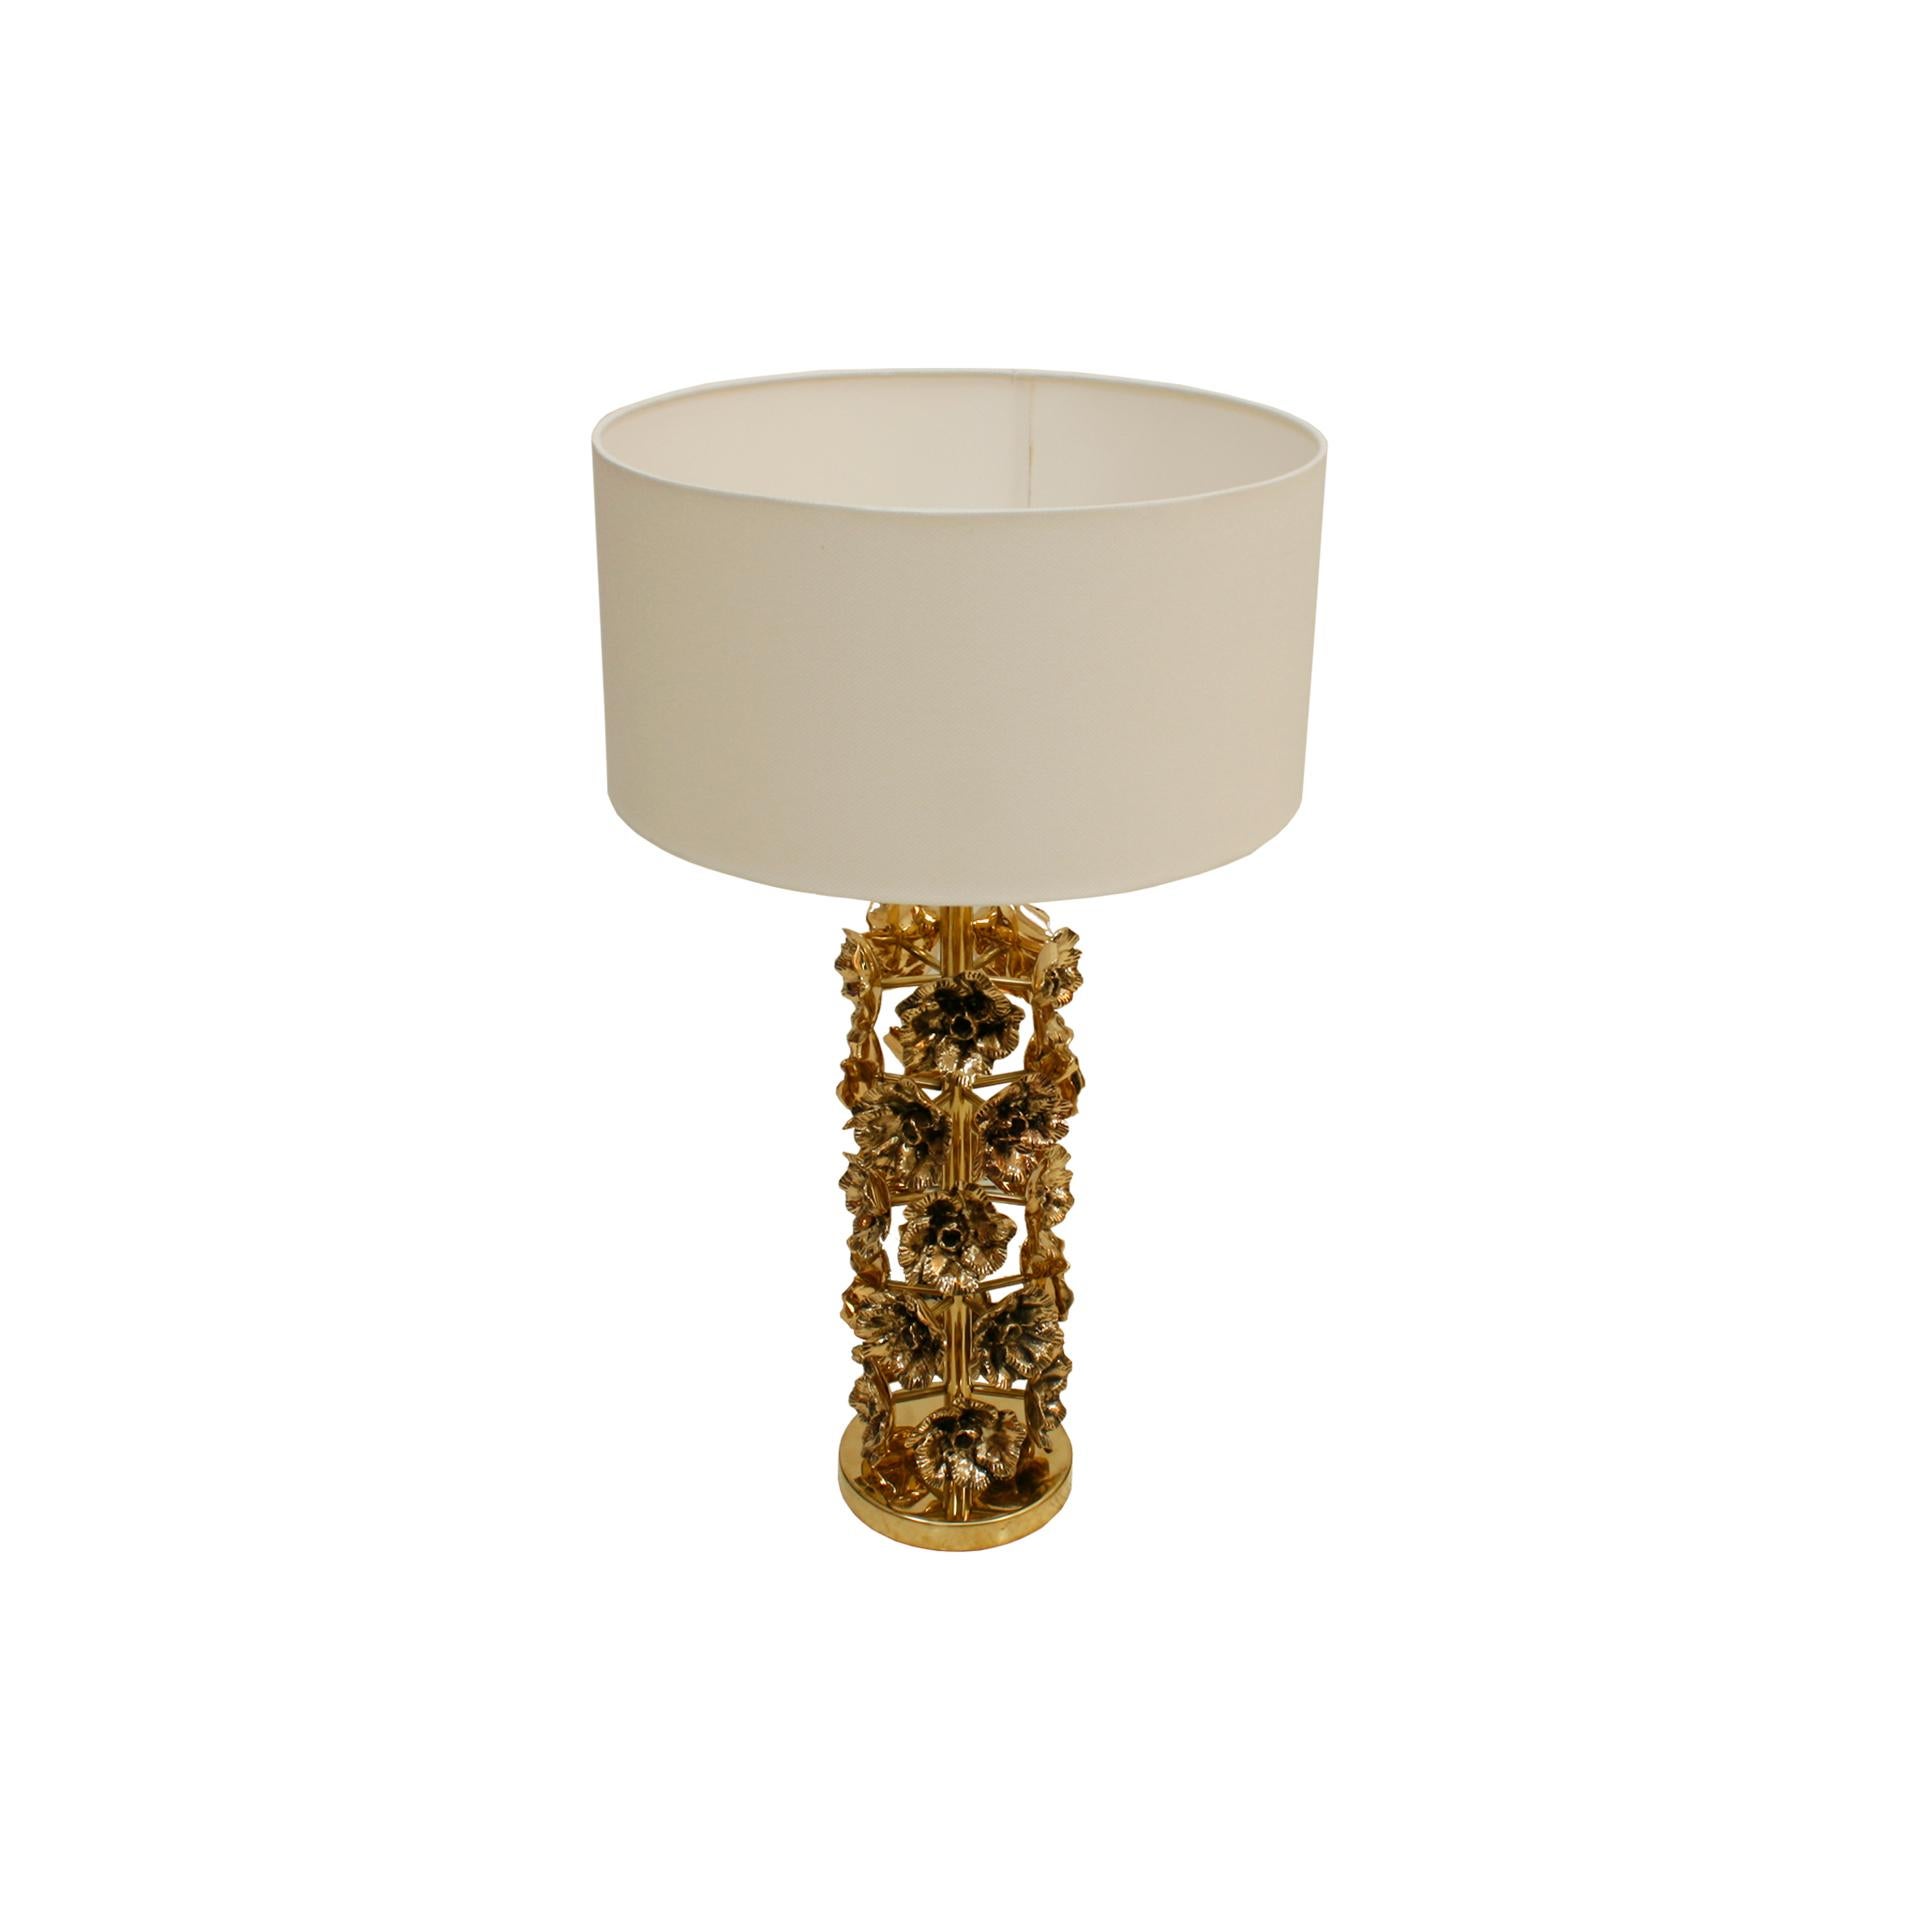 Pair of contemporary table lamps with brass structure and white cotton thread shades made in Italy.

Measurements: Diameter 20 x height 70 cm

Measurements with shade: Diameter 45 x height 88 cm.

Every item LA Studio offers is checked by our team